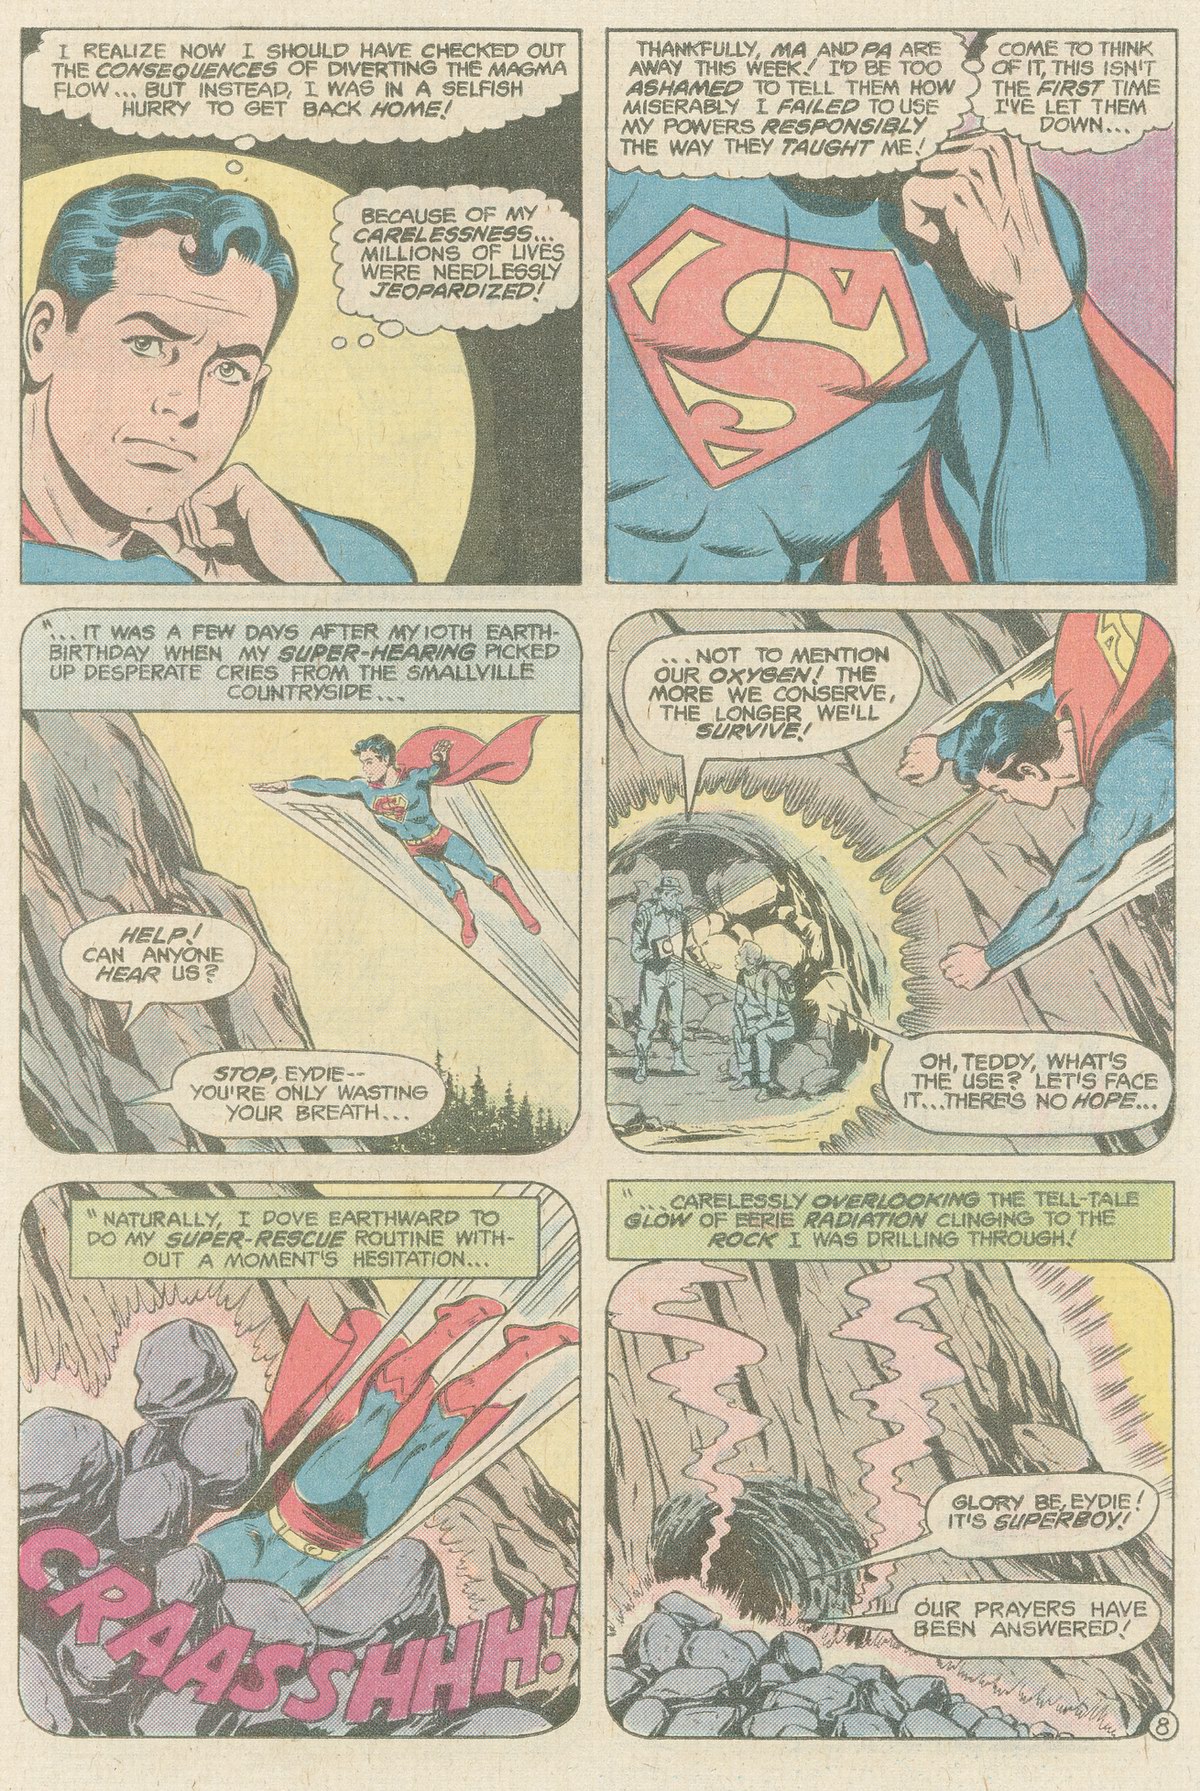 The New Adventures of Superboy 22 Page 8